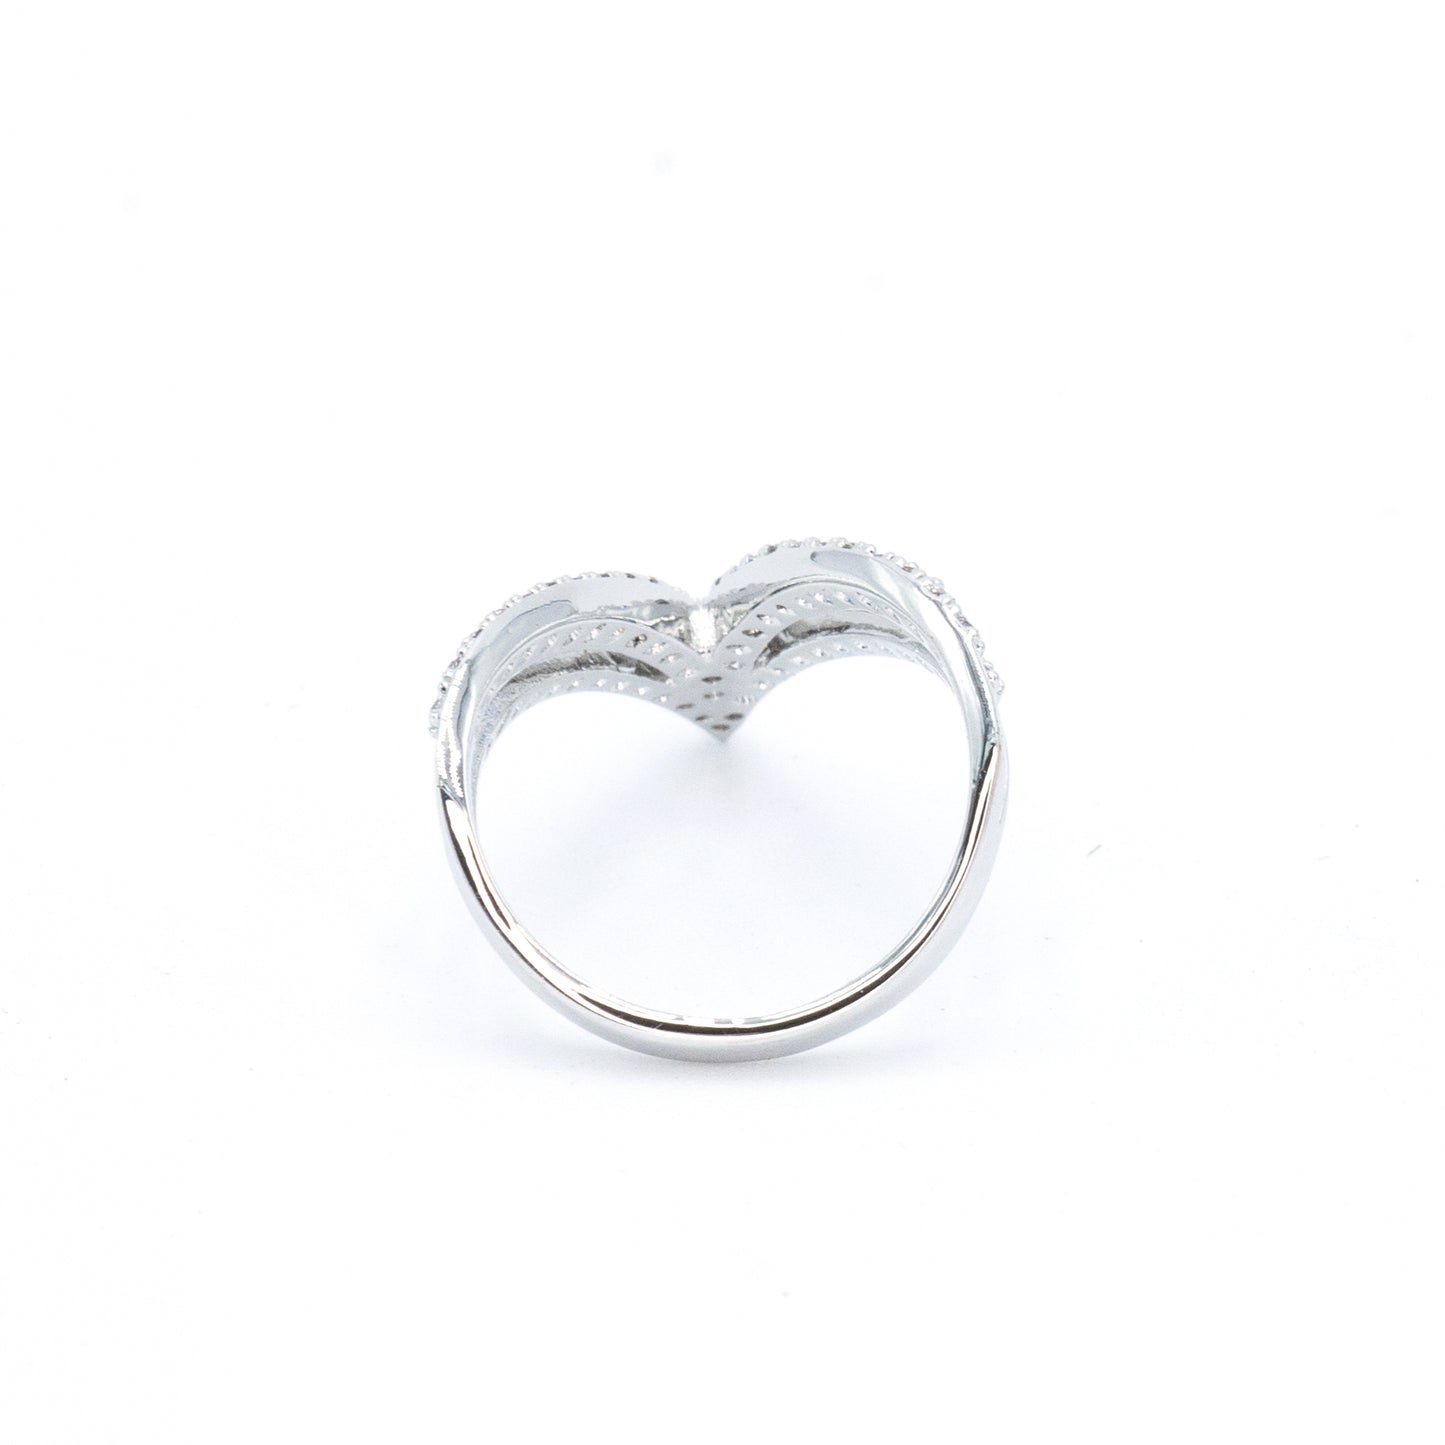 The Pave V Ring in Rhodium